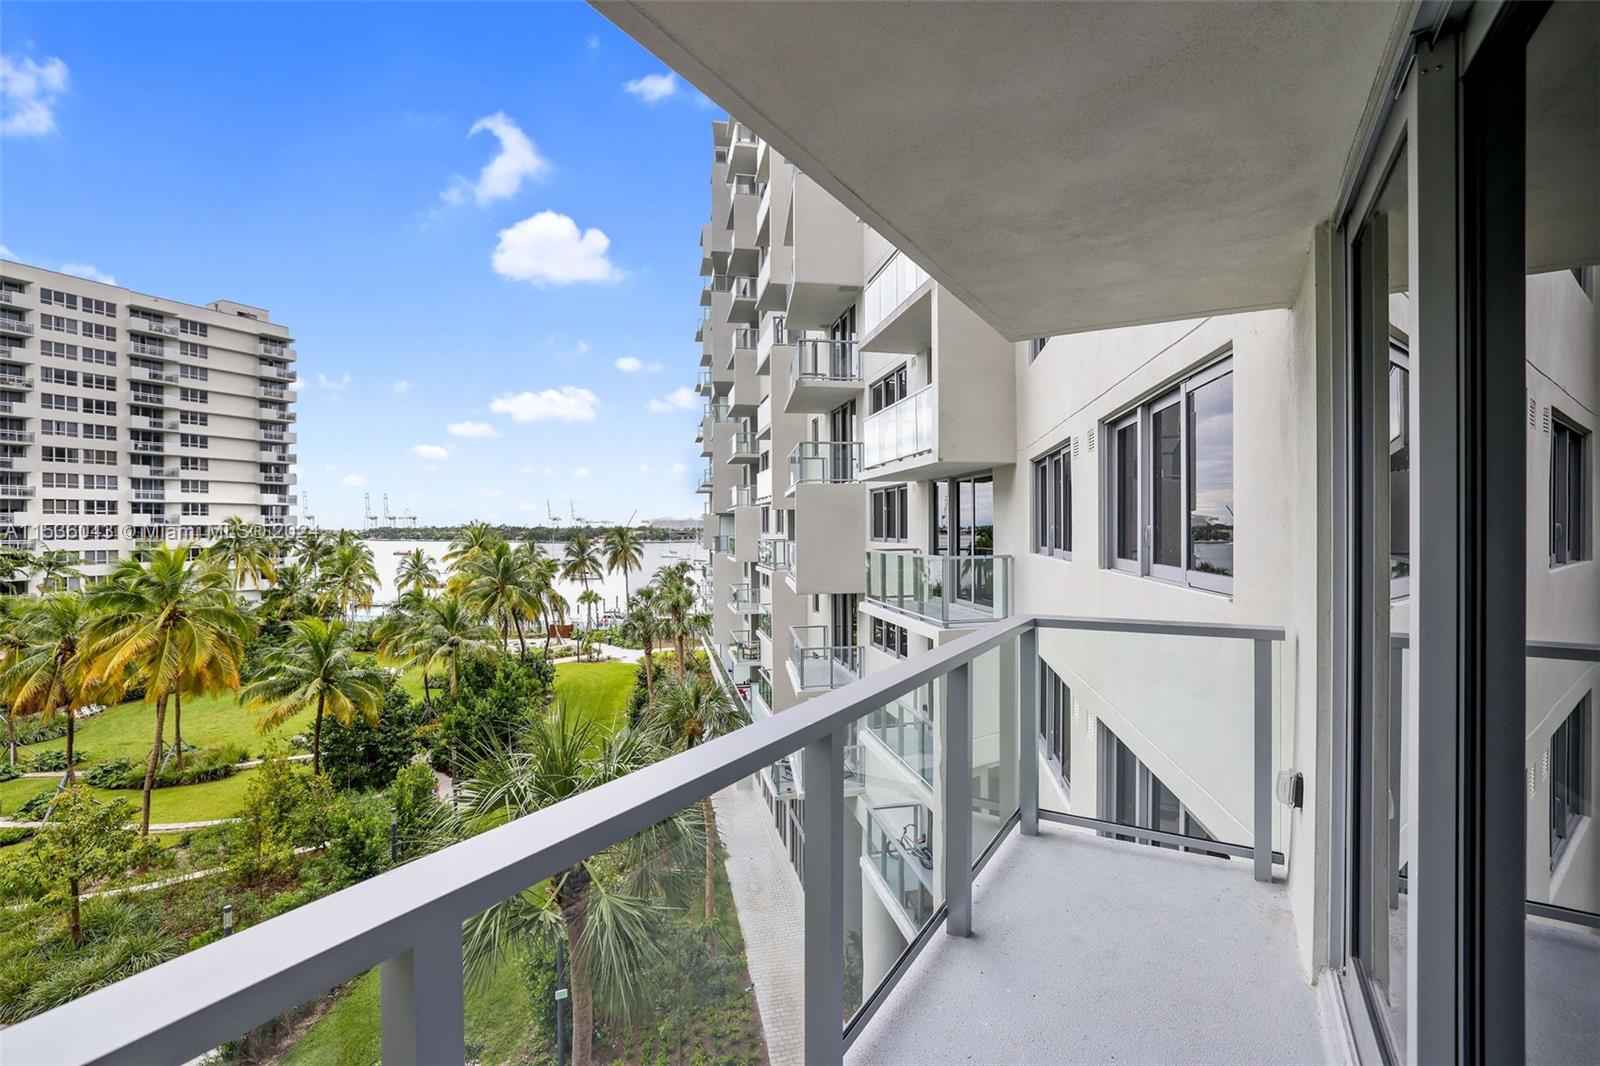 *Receive one month free on immediate move-in, apply by 05/19. AVAILABLE 03/16. Welcome to Flamingo Point Miami Beach's most exciting rental community. This newly renovated unit features hardwood floors, modern kitchen & baths w/SS appliances & granite counter tops. Amenities include fitness center, two resort style pools with private cabanas, BBQ area and much more. Move in costs are 1st month + $1500 deposit. Parking cost 1st vchl. $187 p/m. Pet Fee: $400+$50/m. *FAST APPROVAL! (NOTE: Rental rates are subject to change depending on move-in date and lease term. Advertised rate is best rate and maybe on leases longer than 12 months. Income must be greater than 3x one month's rent and minimum credit score of 620 in order to be approved).